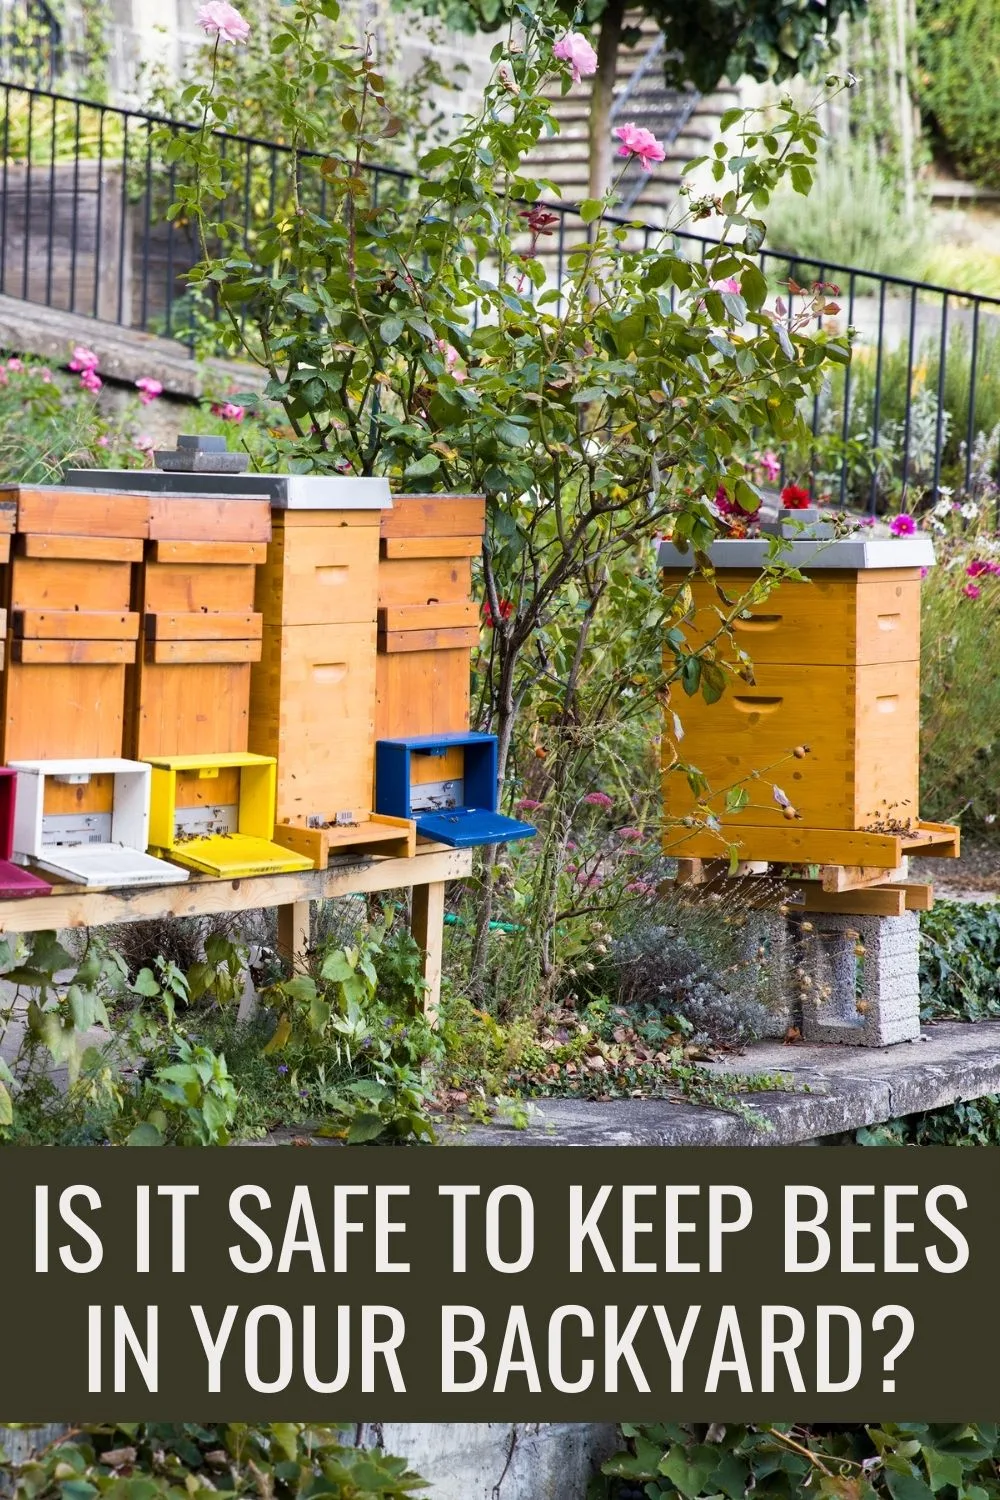 Is it safe to keep bees in your backyard?